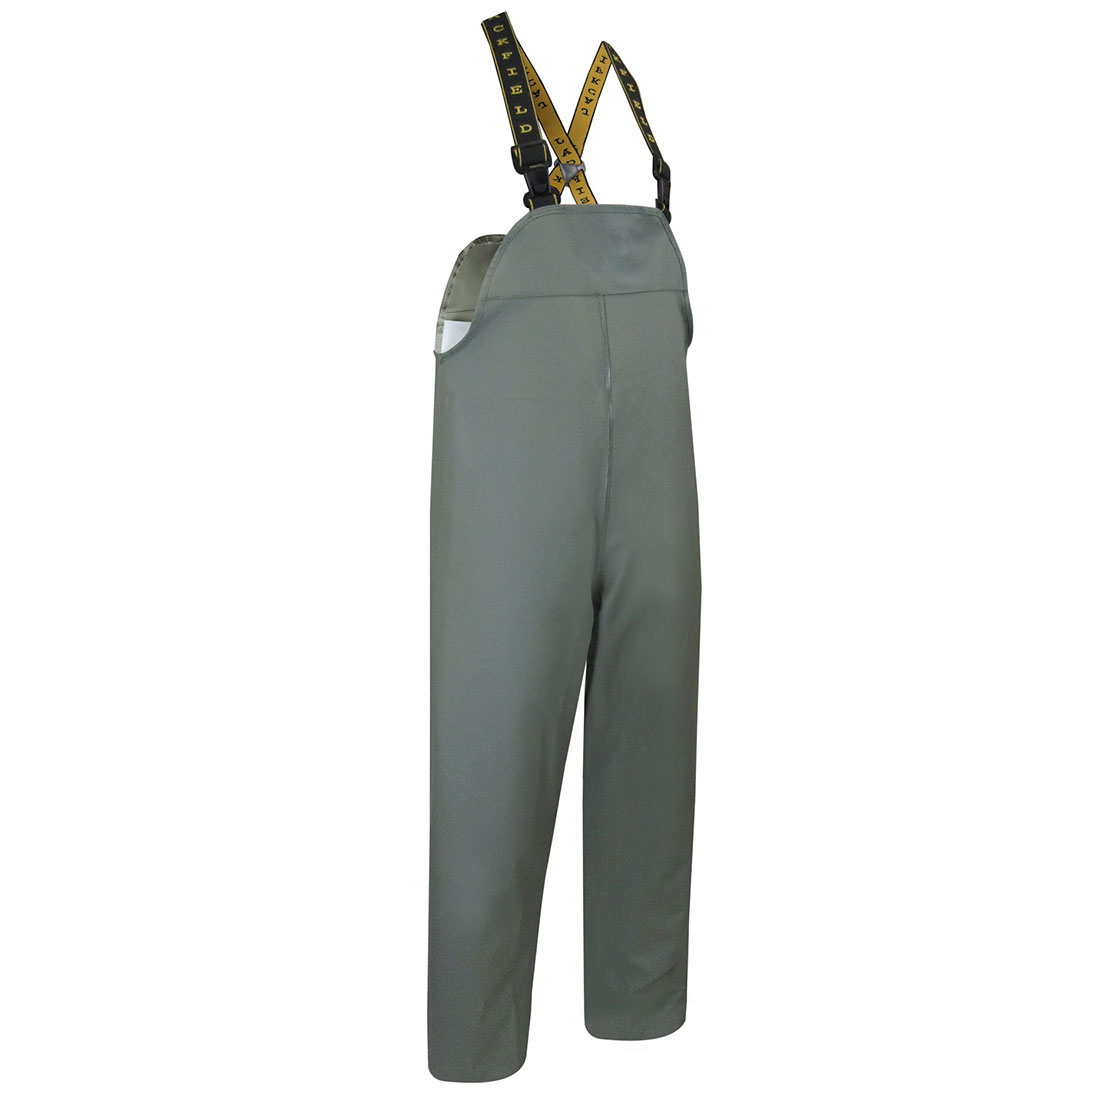 PVC/Polyester Durable Breathable Waterproof Rainsuit Bib Pants With Double Panel